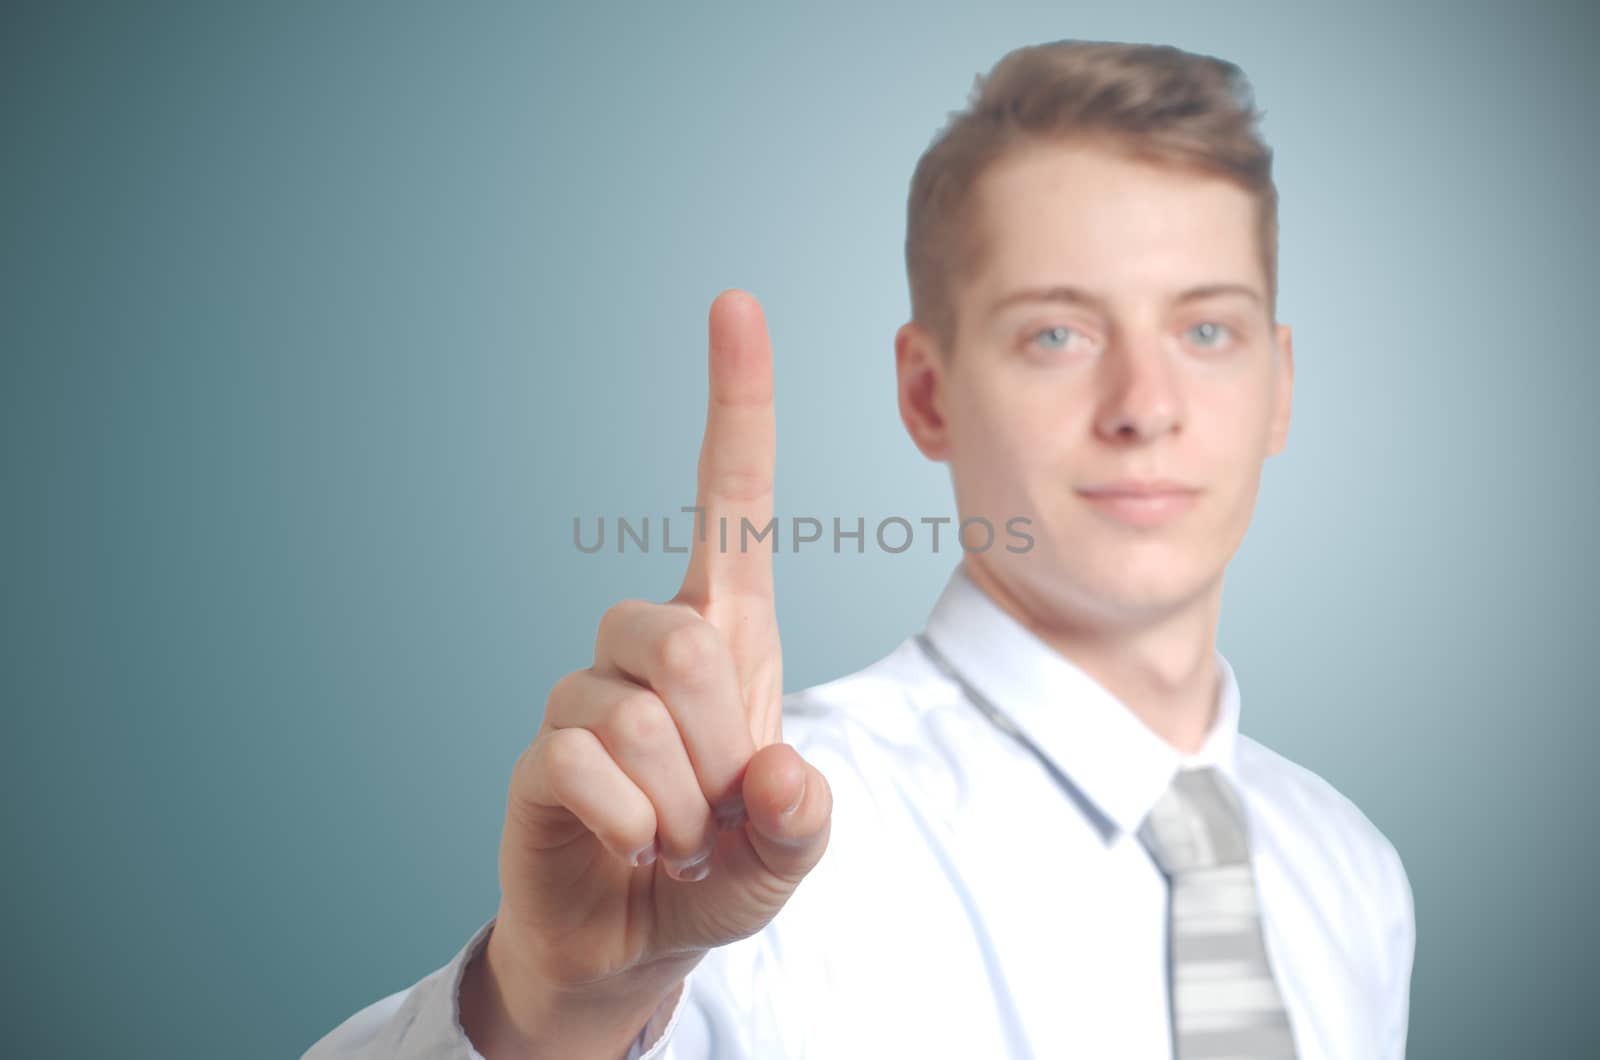 Businessman pushing imaginary button one finger - insert own concept